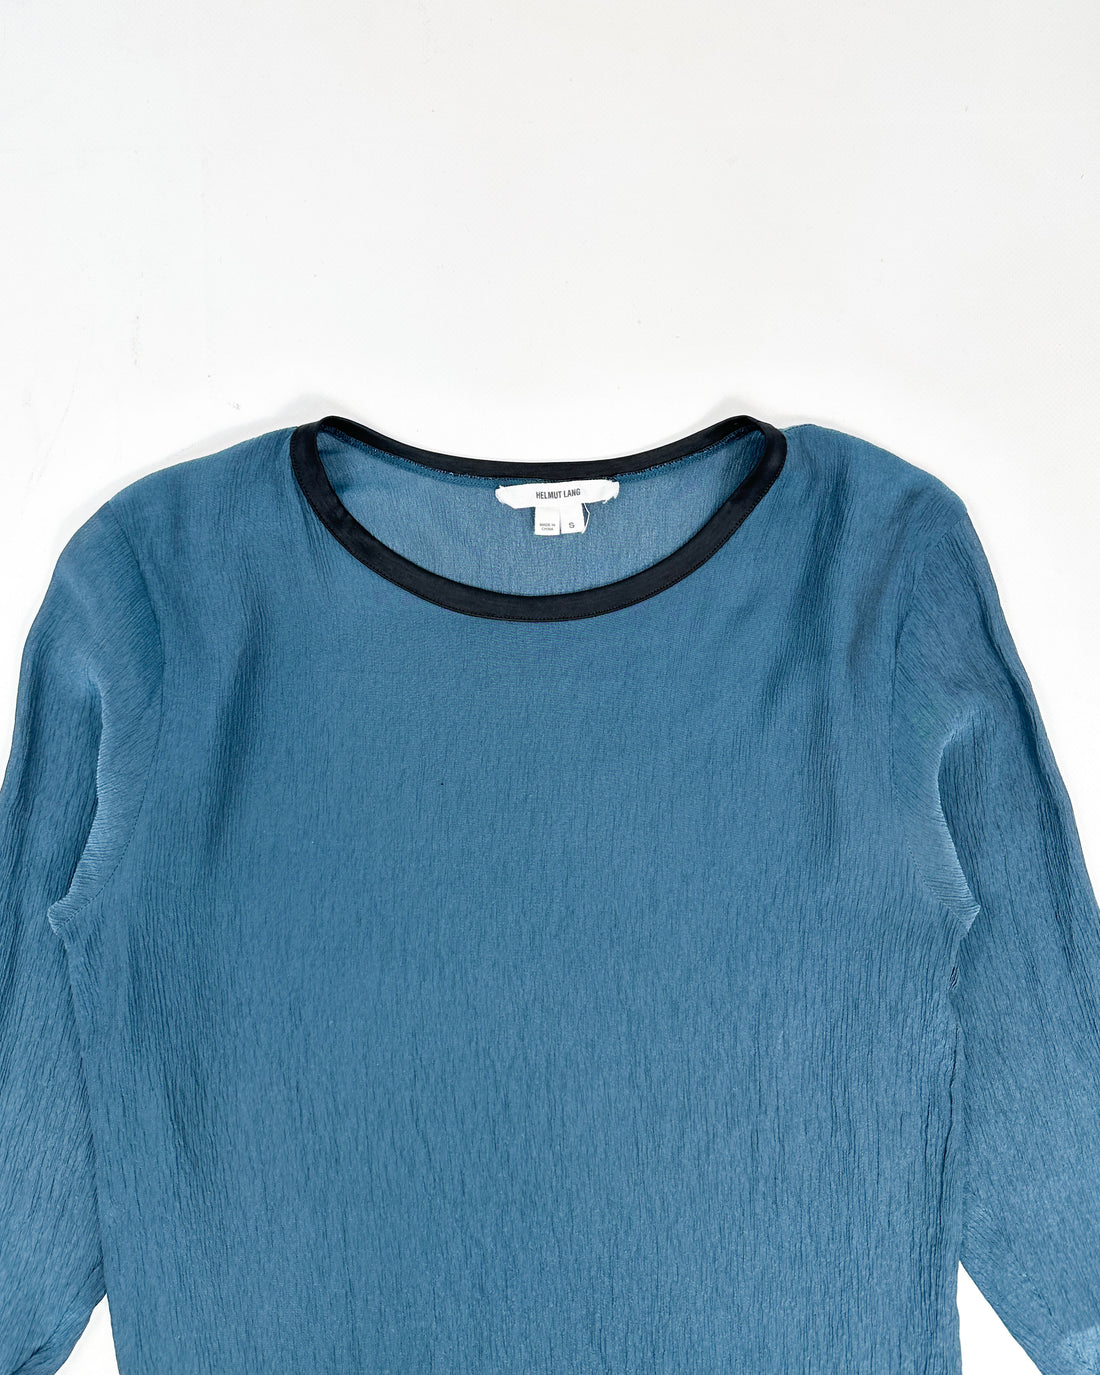 Helmut Lang Pleated Blue Long Sleeve Top 2000's